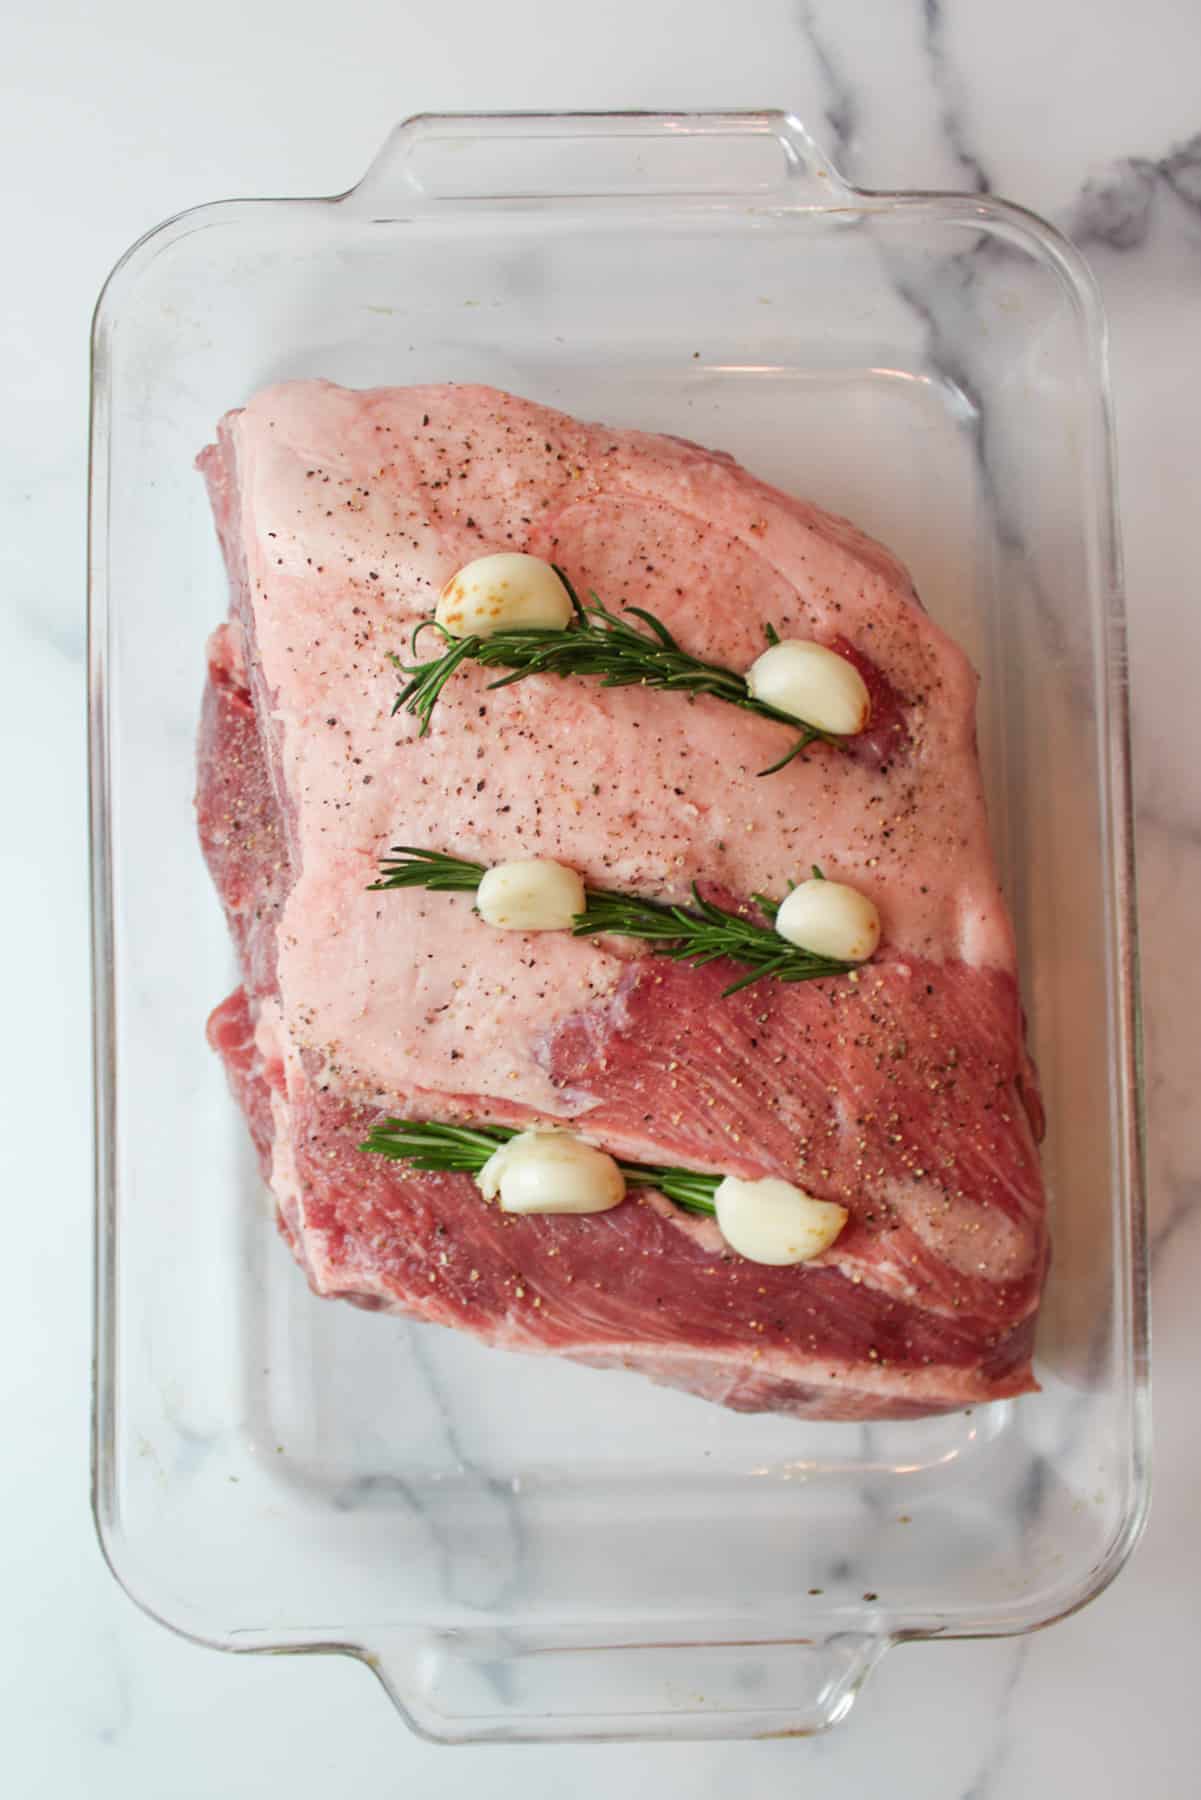 fresh rosemary and garlic cloves tucked into three slits cut into a pork shoulder roast in a baking dish